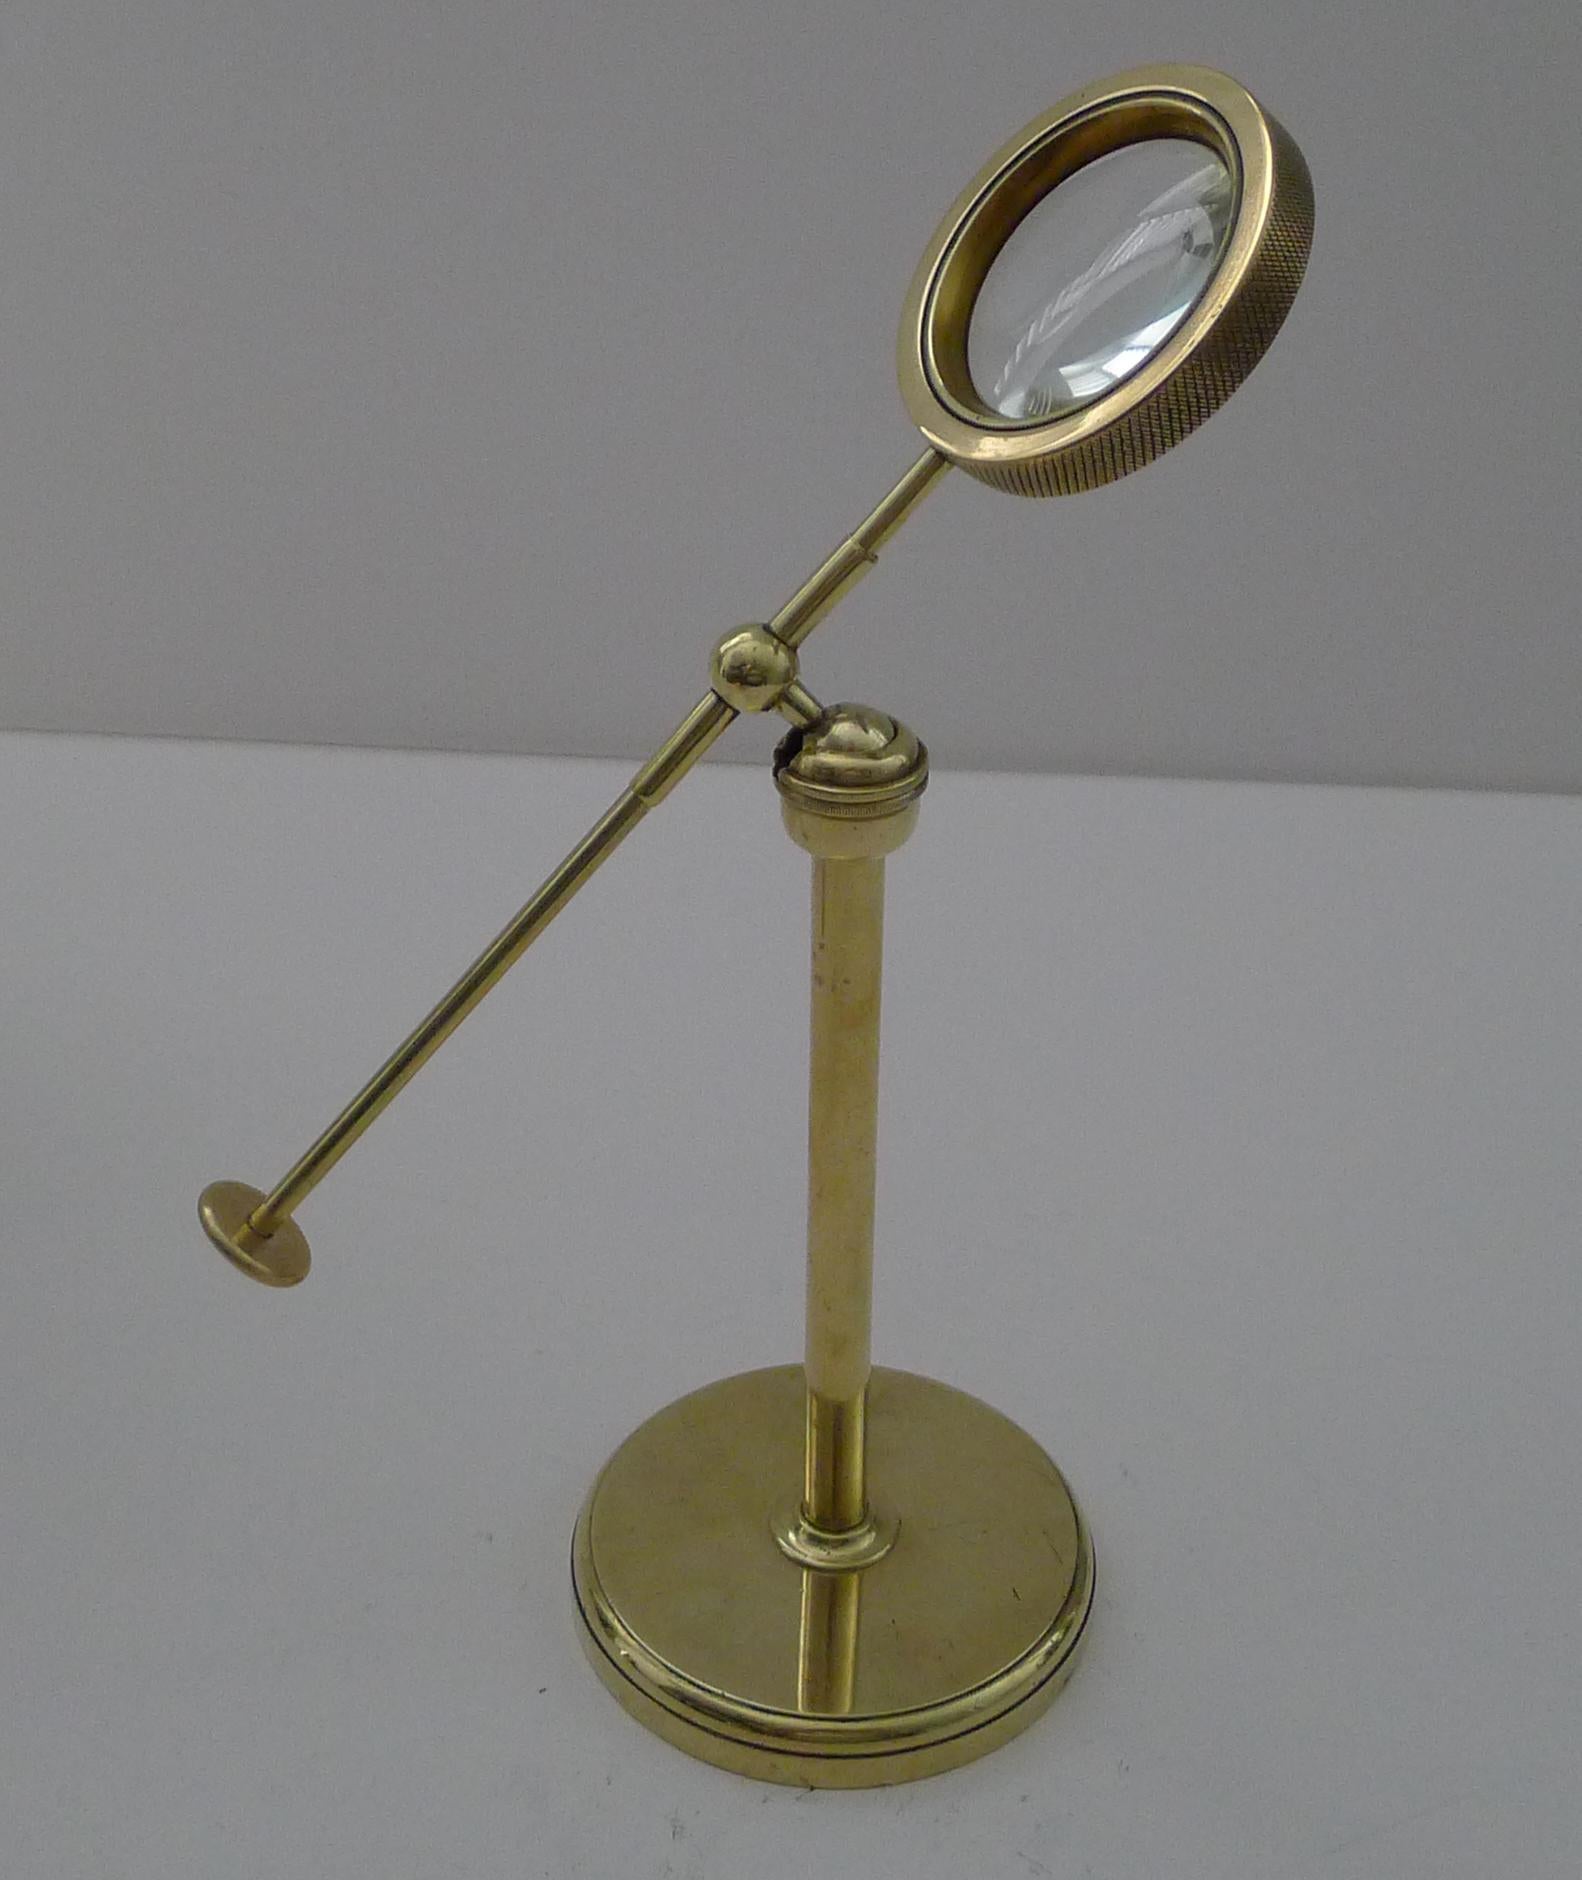 Early 20th Century English Edwardian Brass Pivoting Magnifying Glass on Stand c.1900 For Sale